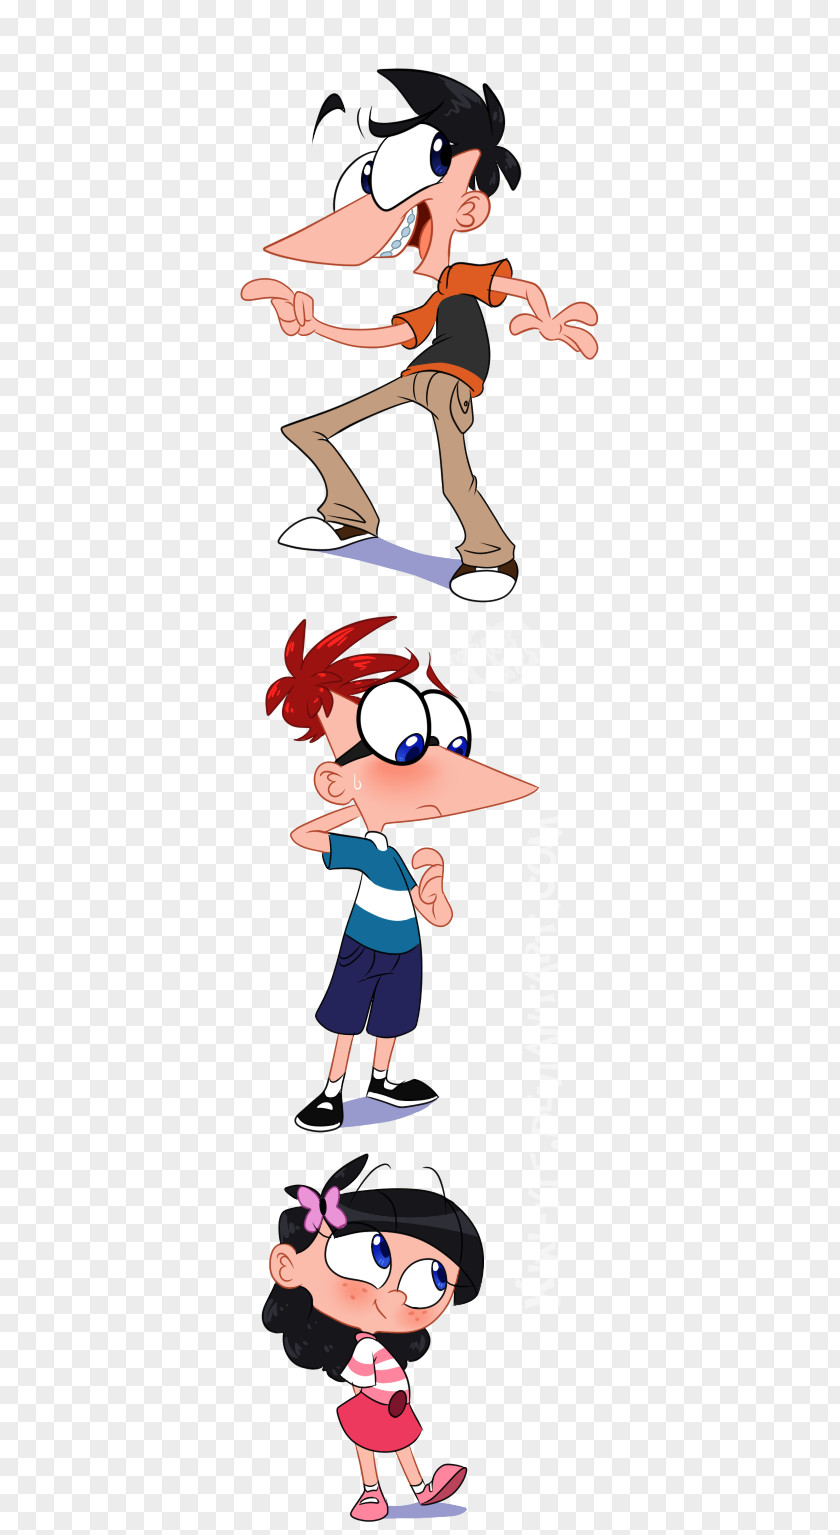 Phineas And Ferb Isabella Vore Clip Art Illustration Animated Cartoon Physical Fitness PNG